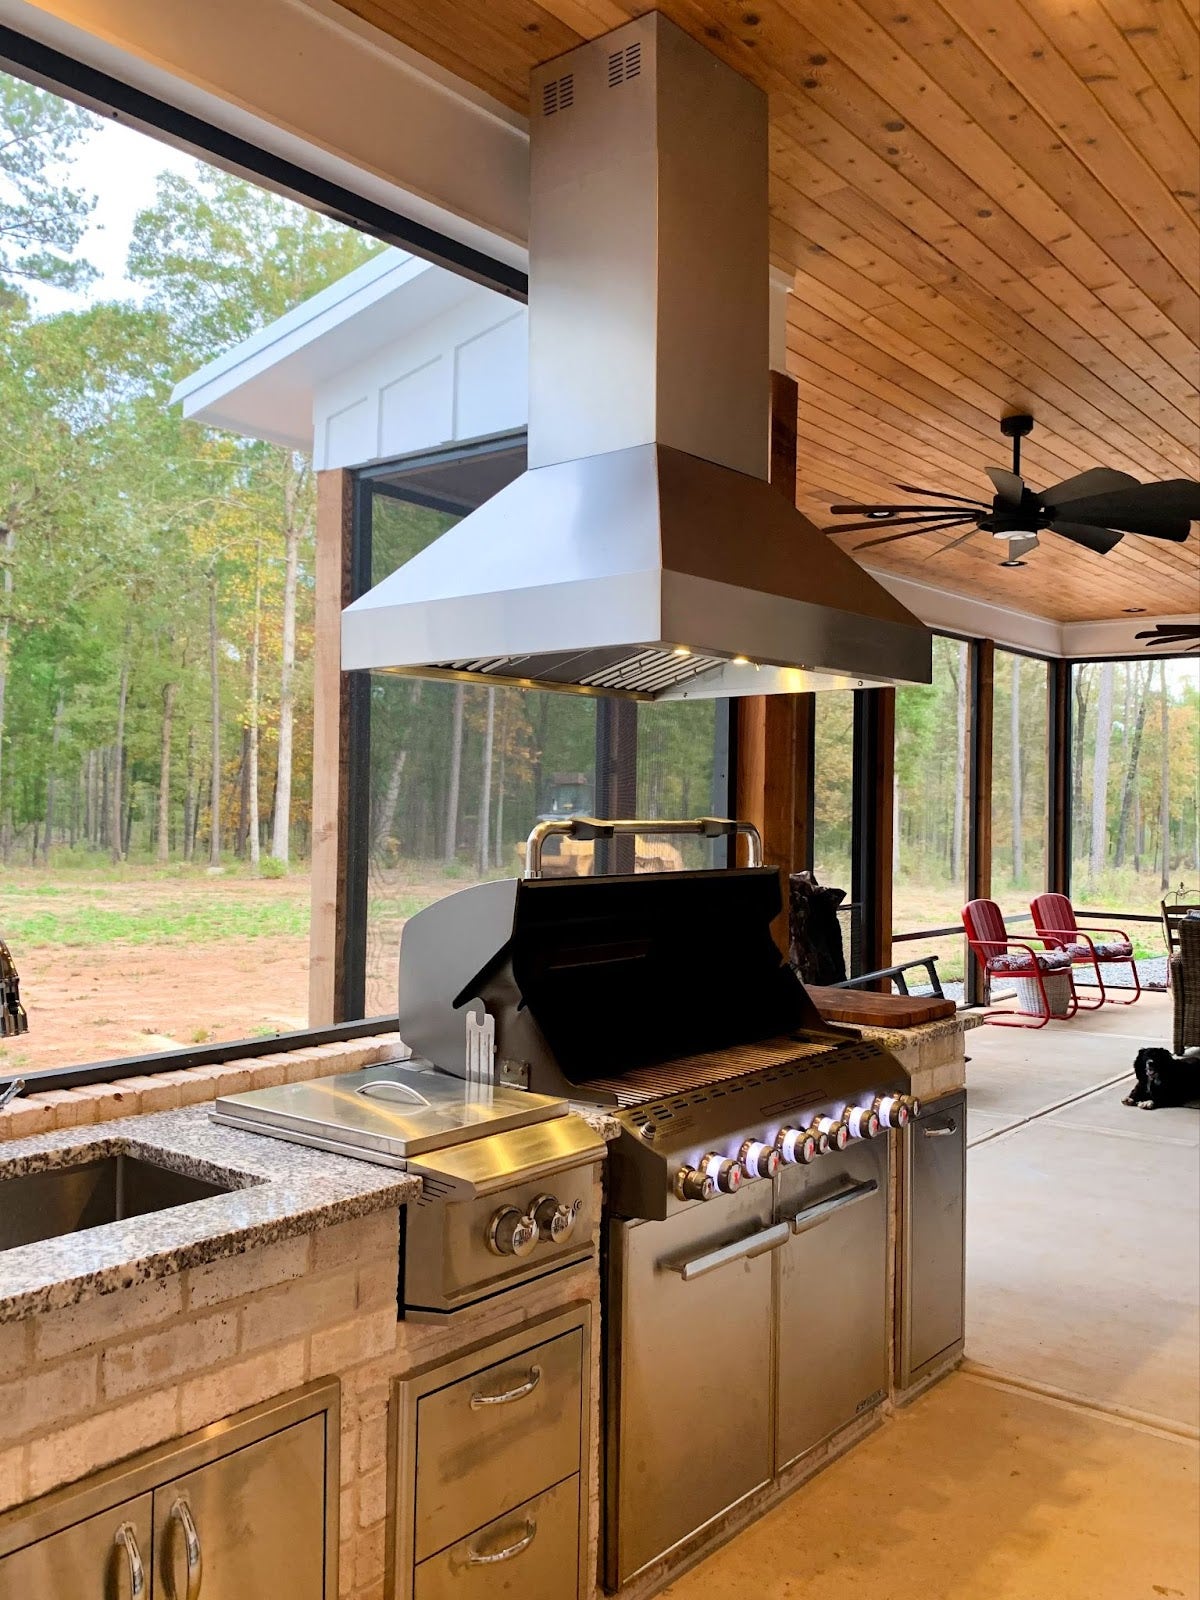 Spacious covered outdoor kitchen featuring a Proline range hood with a view into the woods - prolinerangehoods.com